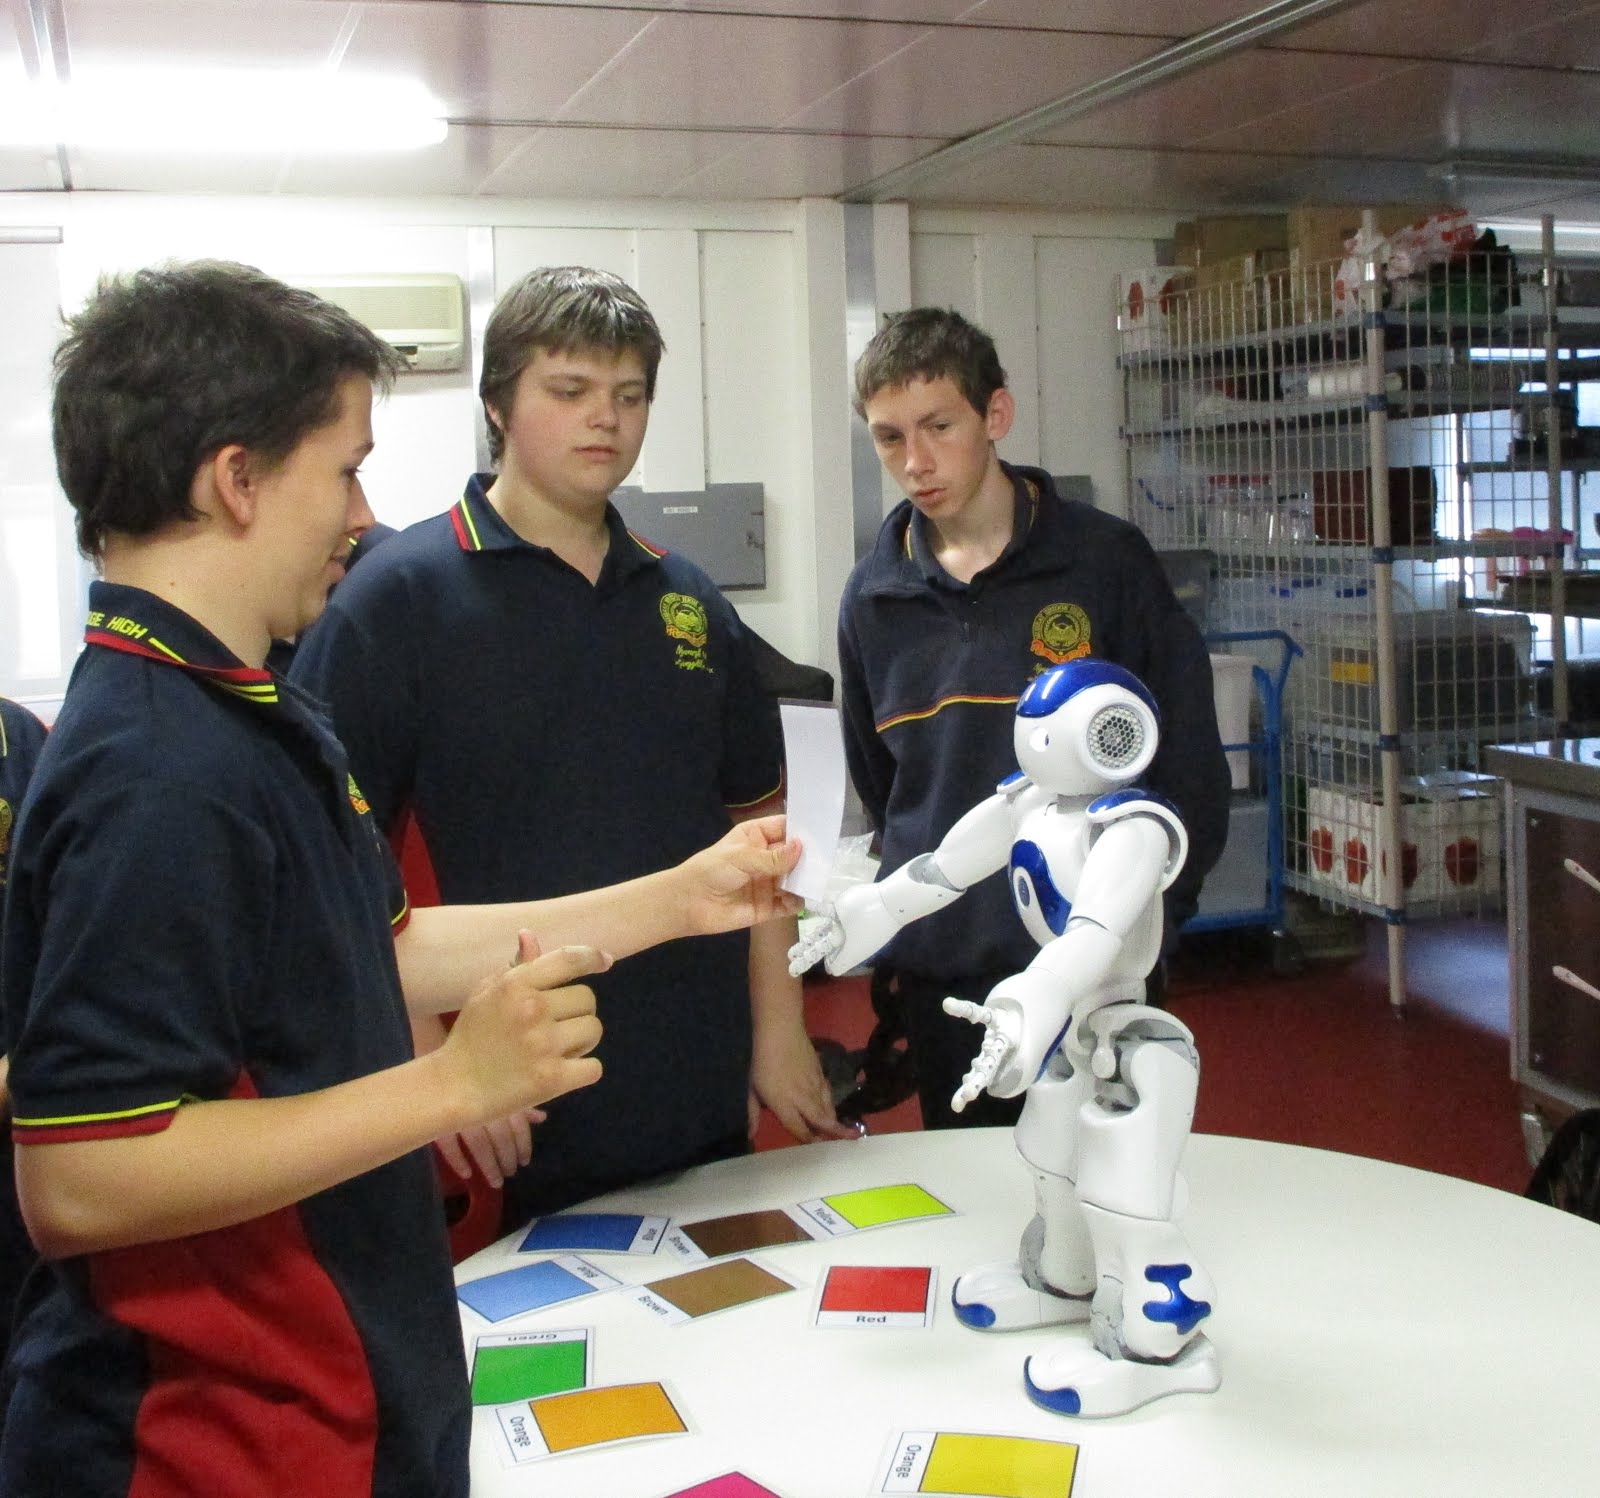 We can play games with NAO our social robot.